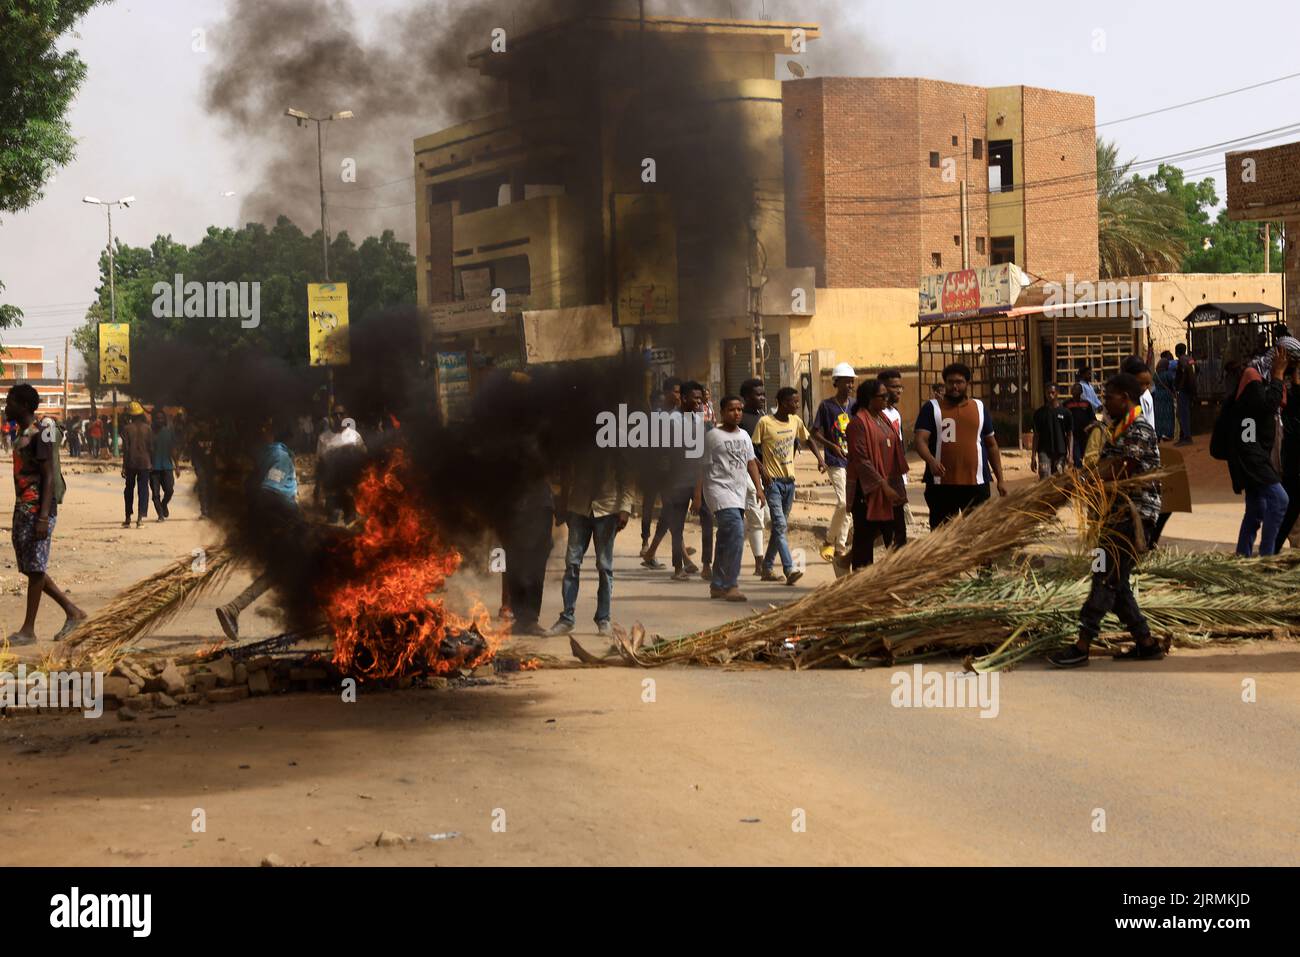 Protesters make a fire as they march through the capital Khartoum during a rally against military rule following the last coup, in Khartoum, Sudan August 25, 2022. REUTERS/Mohamed Nureldin Abdallah Stock Photo